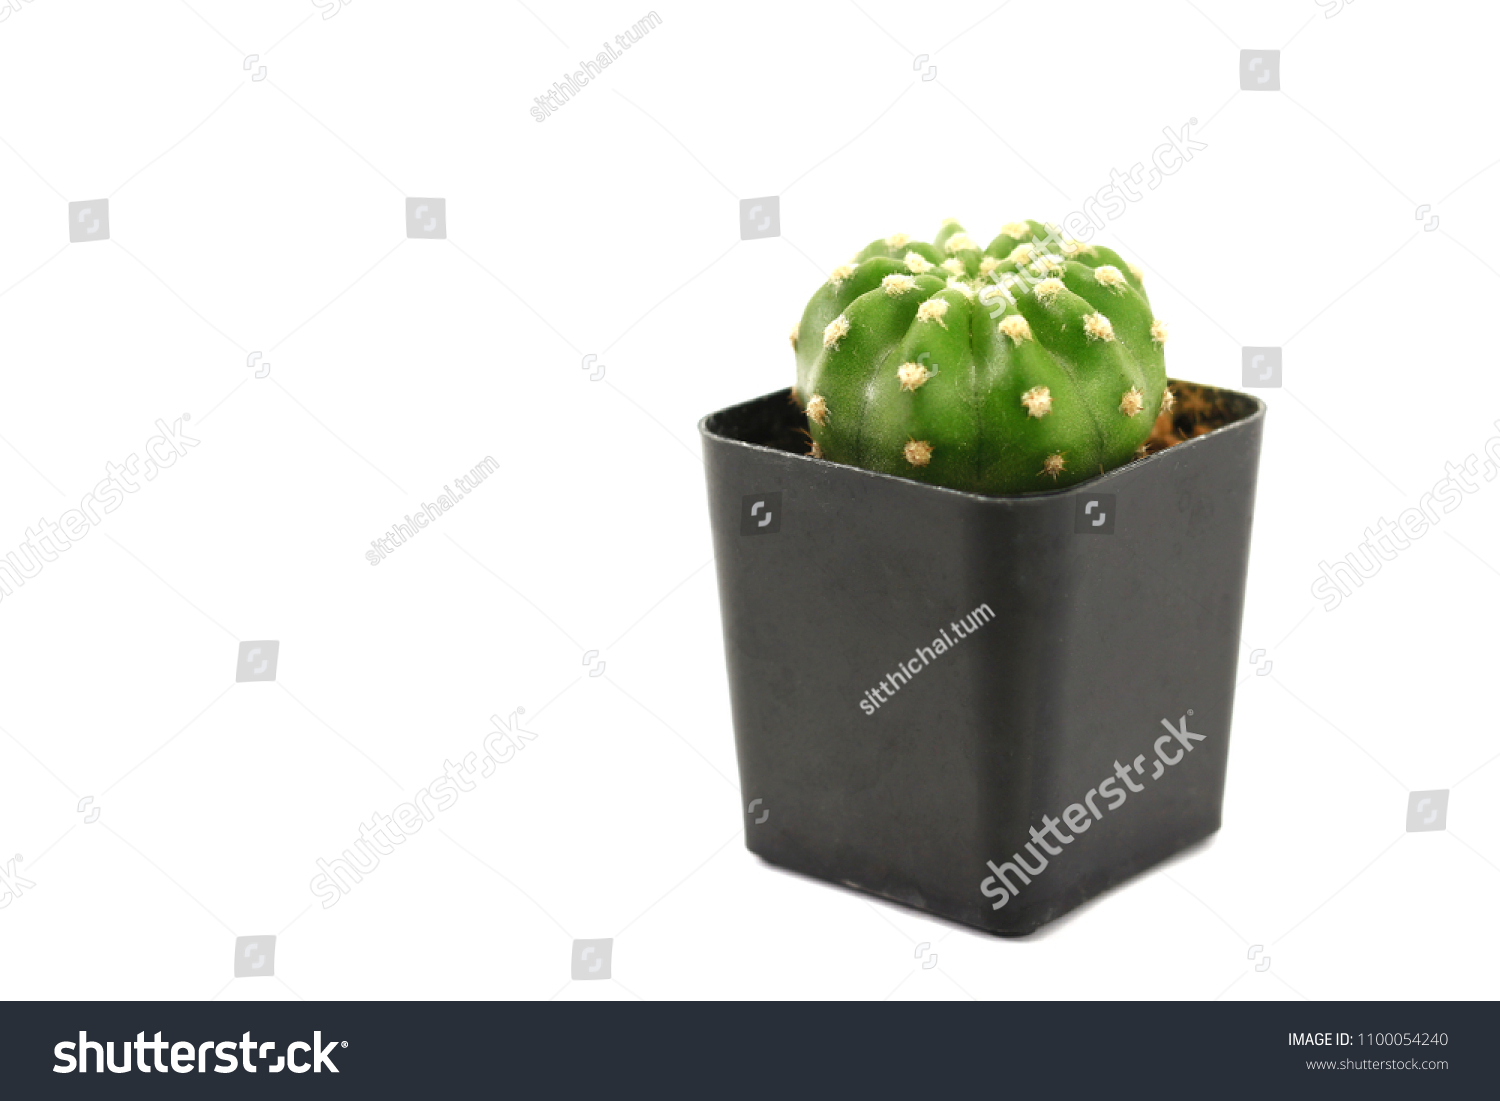 Cactus in a black pot on a white background. Cactus is a small tree used to decorate and decorate both the bedroom and the office. Can be placed near the computer screen. #1100054240